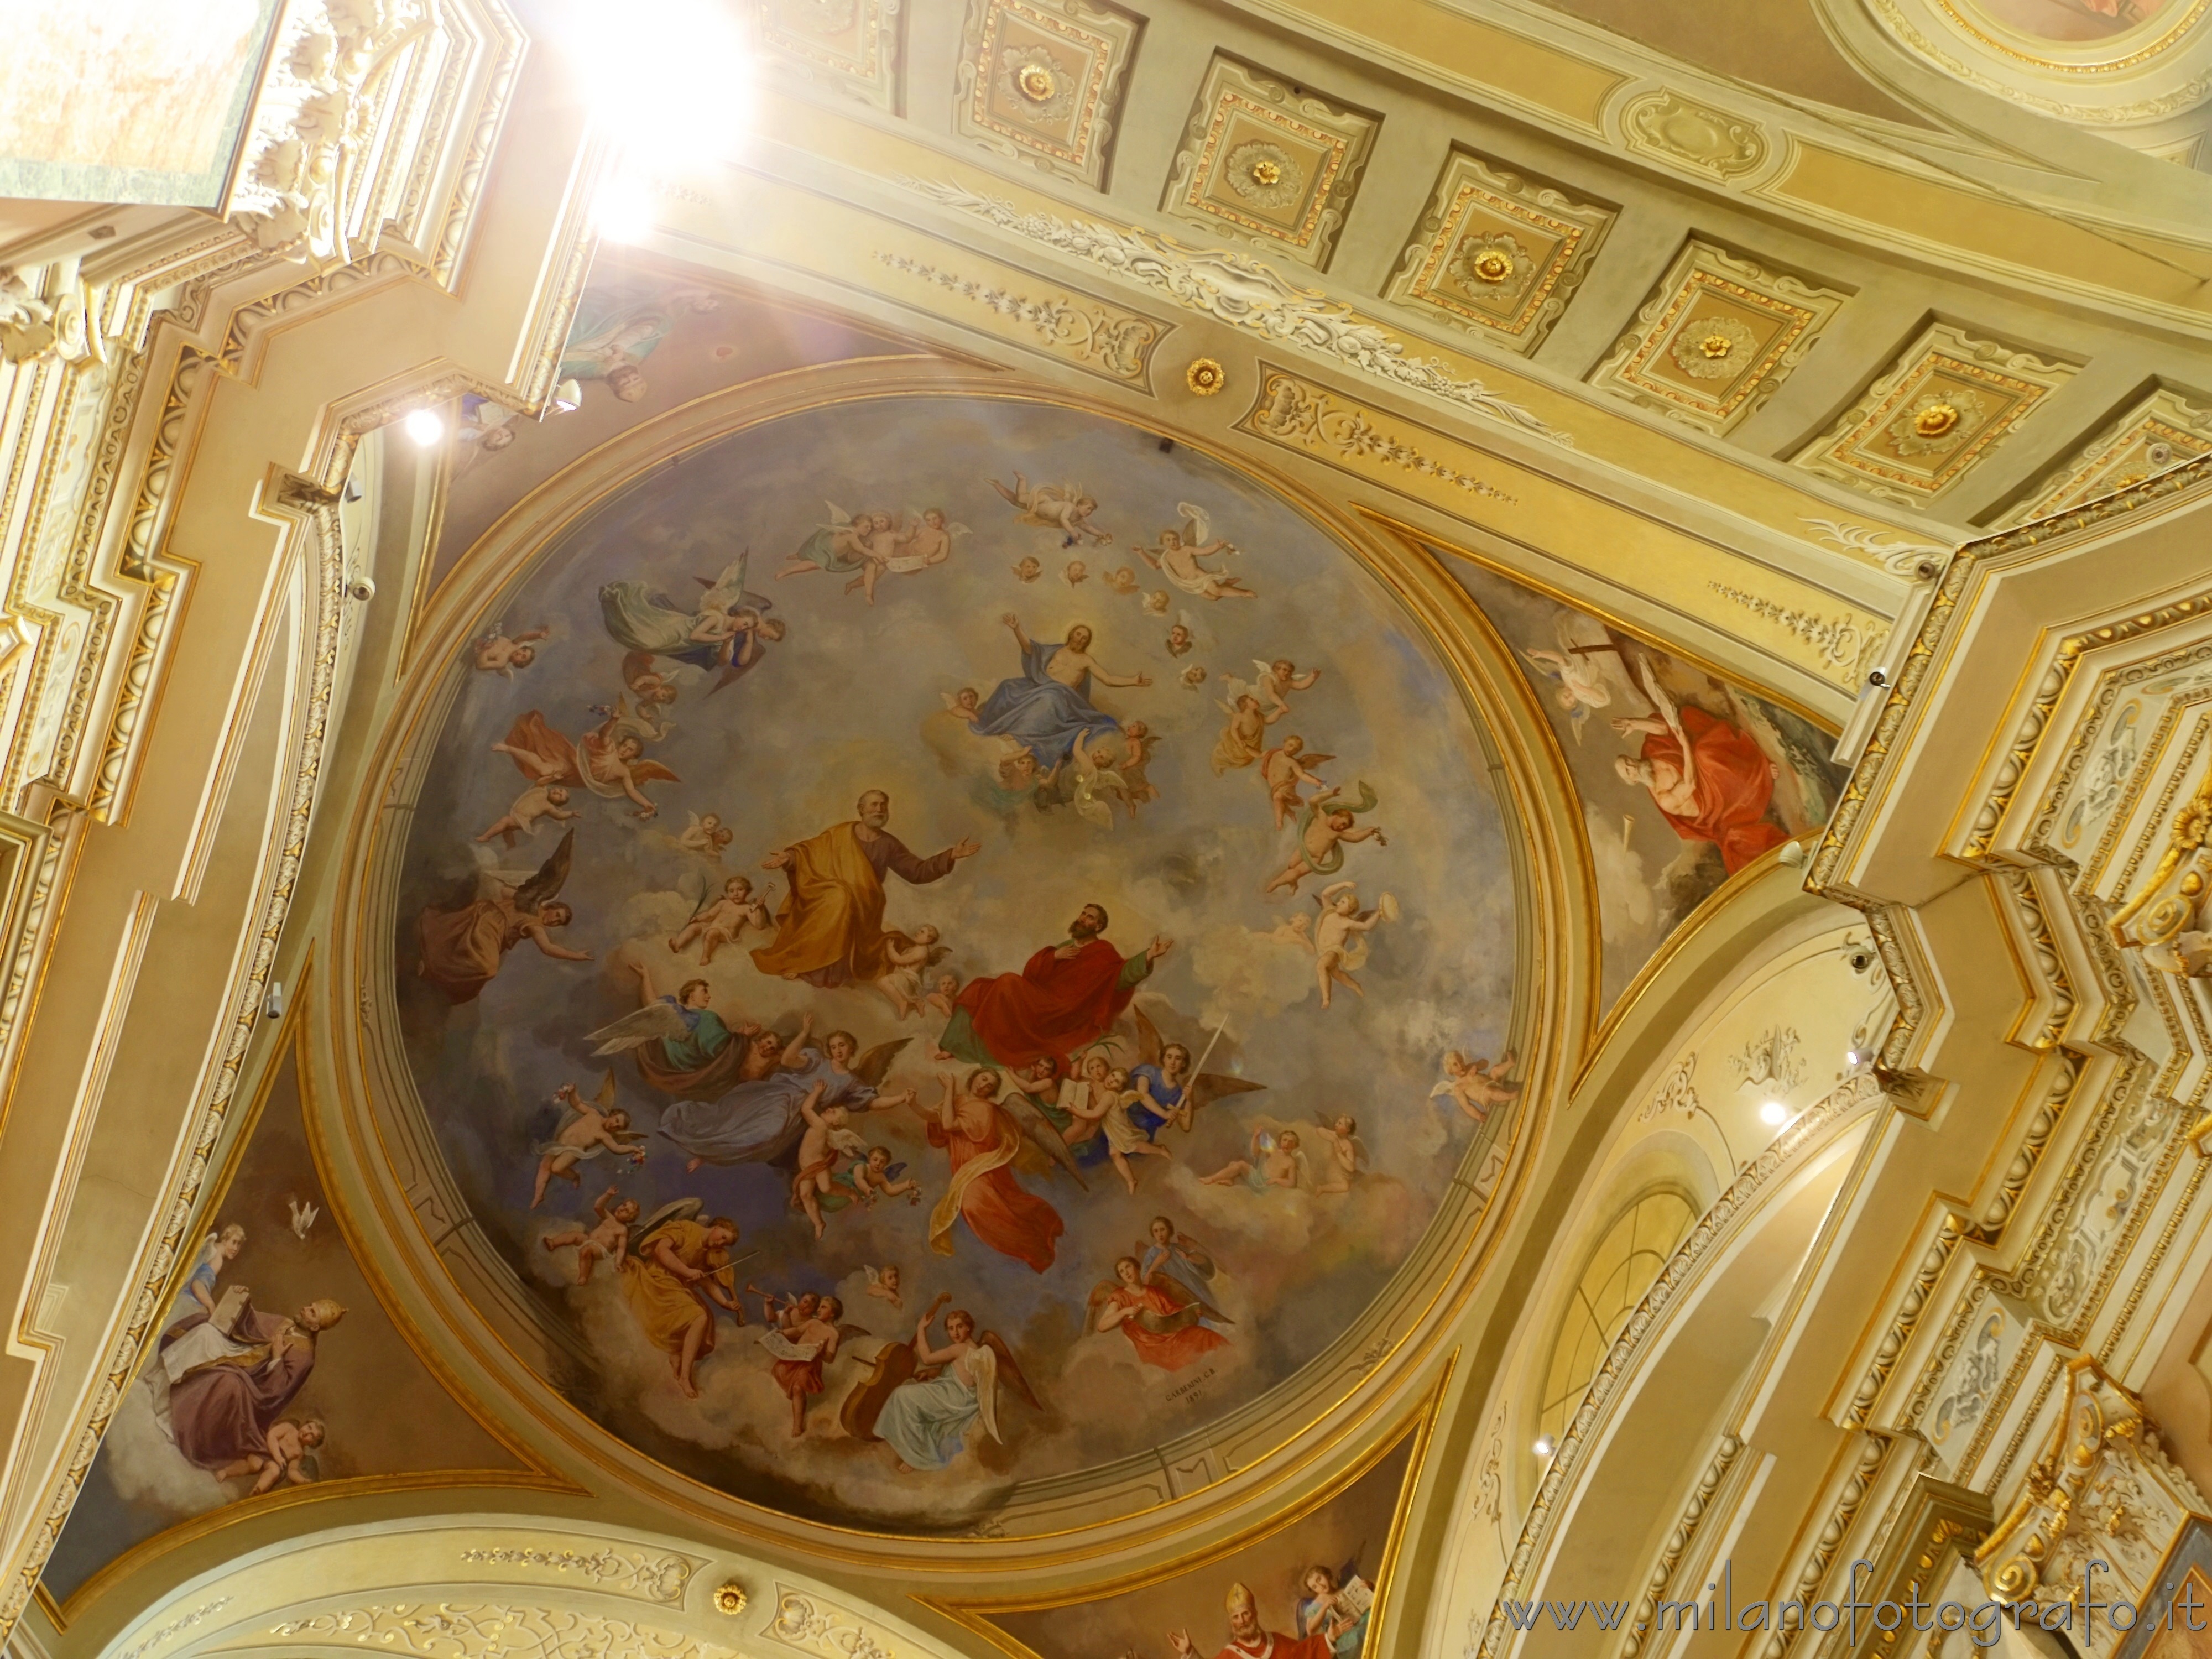 Cilavegna (Pavia, Italy): Frescos on the ceiling of the Church of the Saints Peter and Paul - Cilavegna (Pavia, Italy)